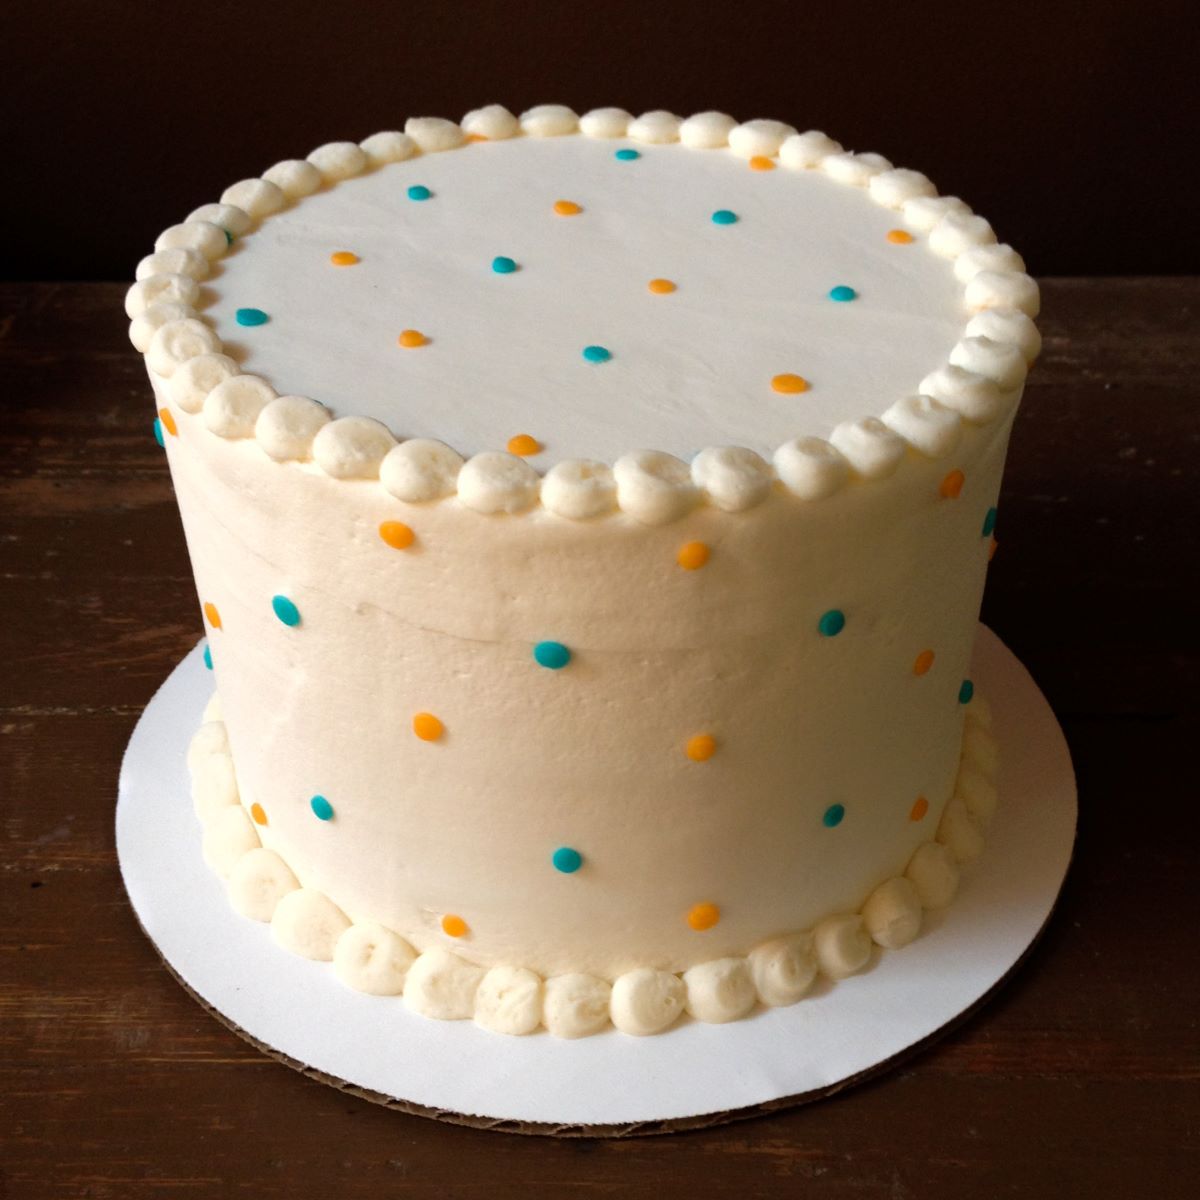 A simple white cake with a dainty minimalist dot pattern.